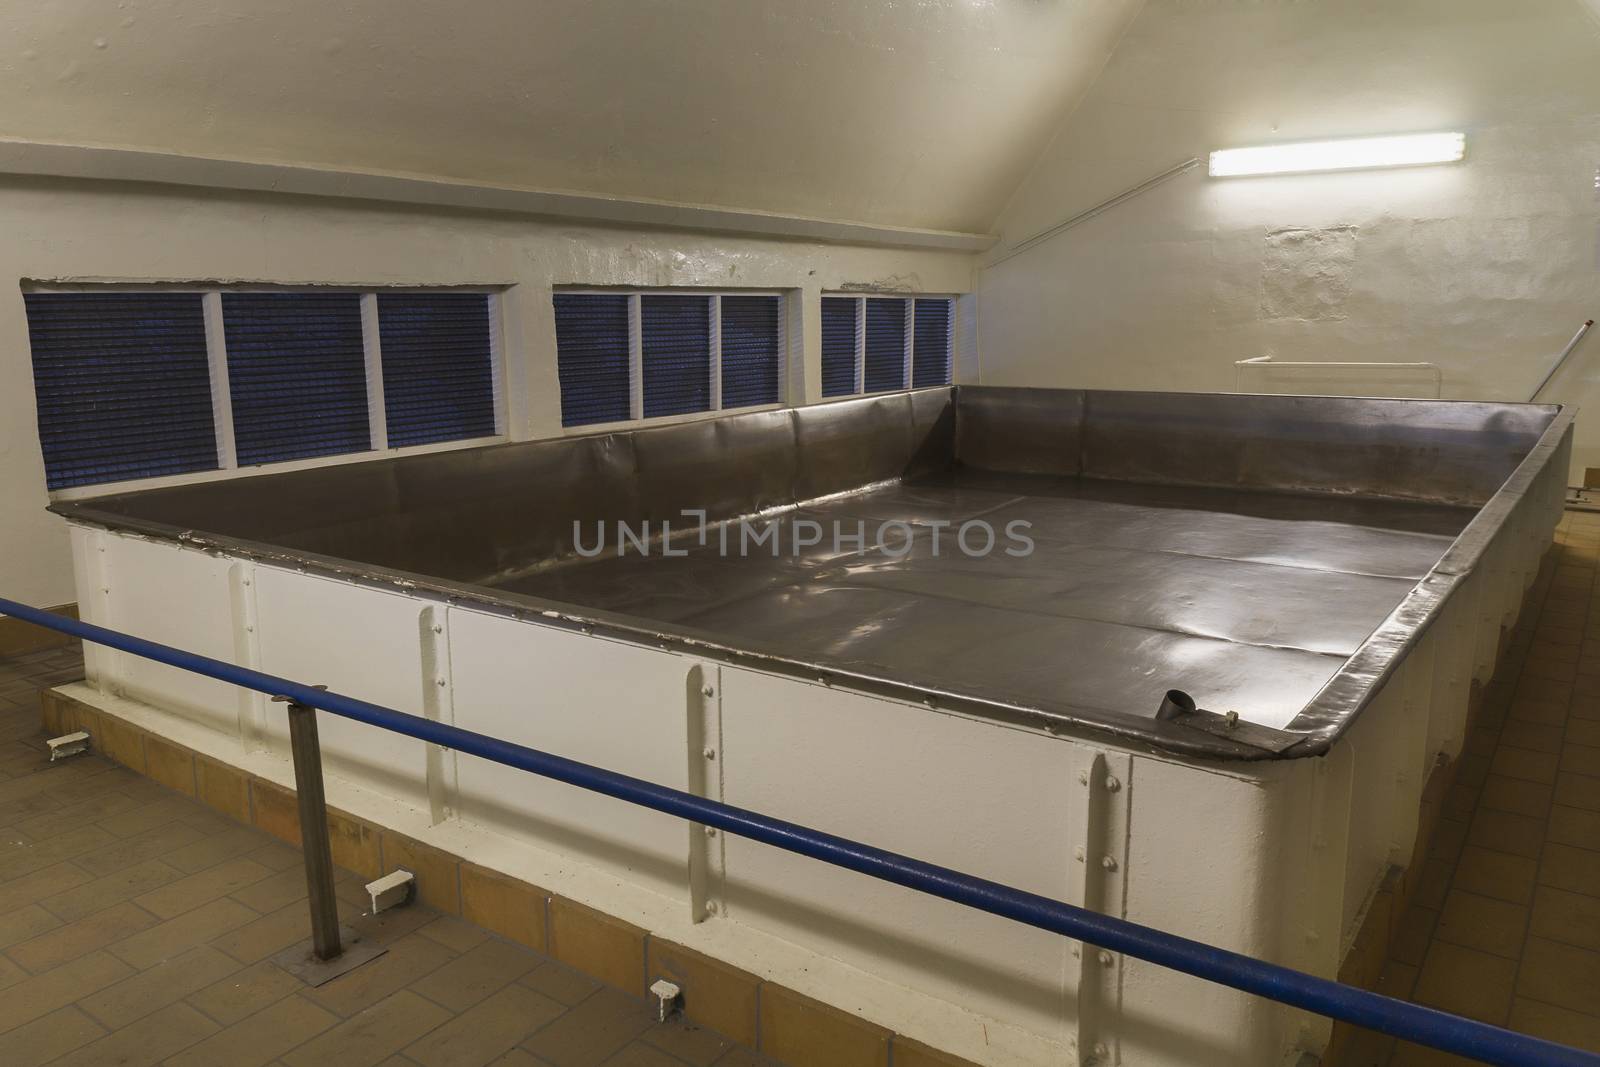 Open fermenter at Brewery Van Honsebrouck in Belgium. Open fermenters harvest will yeast from the air, the ancient way to ferment sugary liquids.